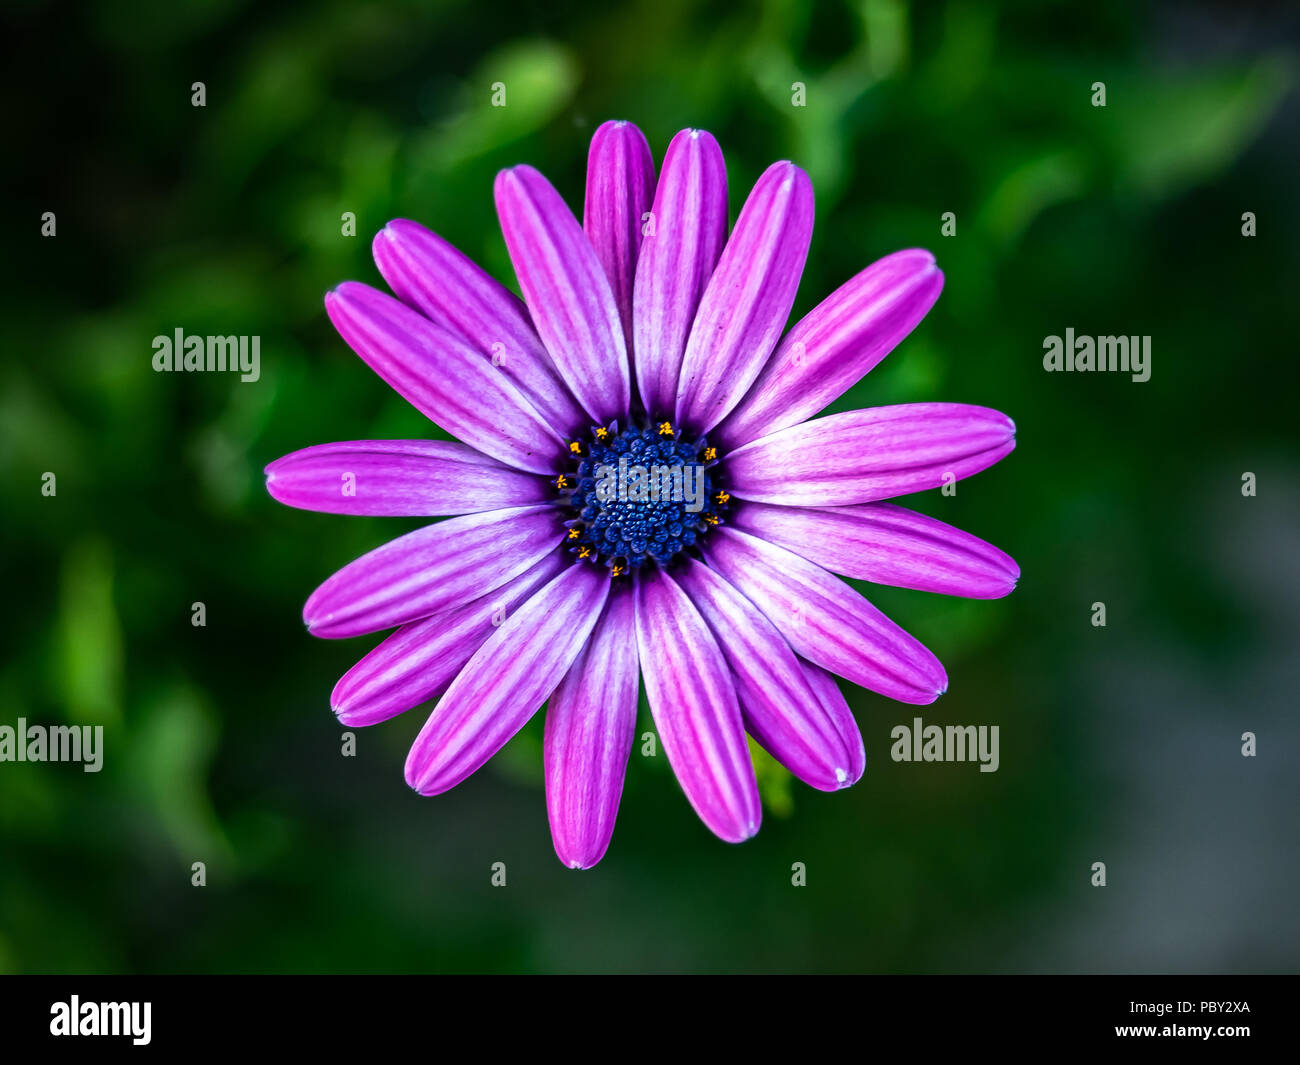 A variety of purple daisy blooms in a garden in central Kanagawa, Japan. Stock Photo